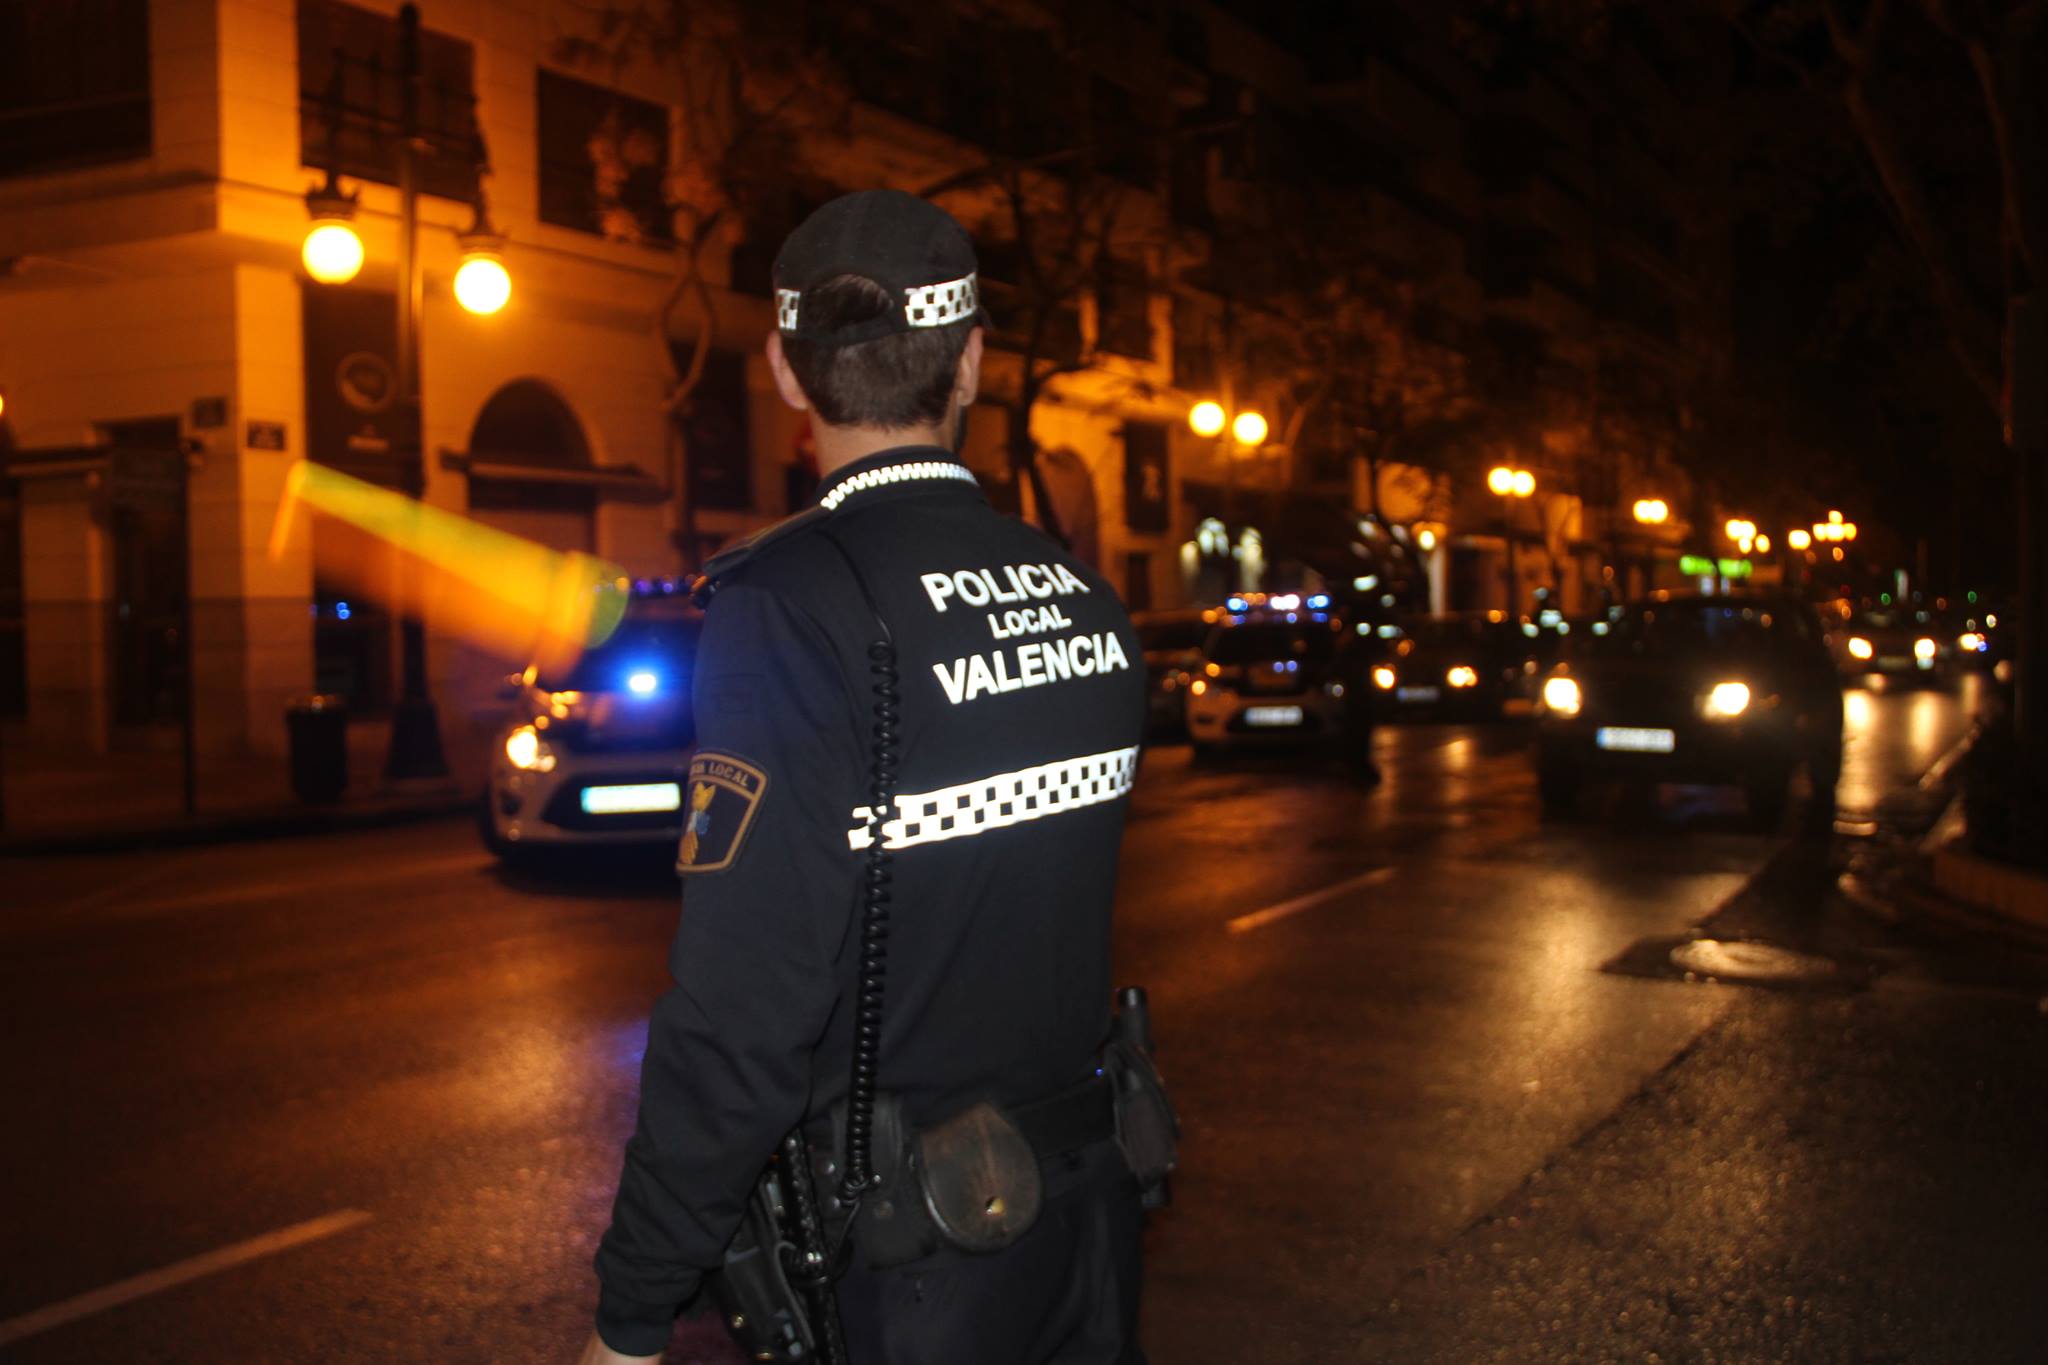 Hit and run suspect with extensive criminal record surrenders- four days after young boy is seriously injured on pedestrian crossing in Spain’s Valencia [Video]